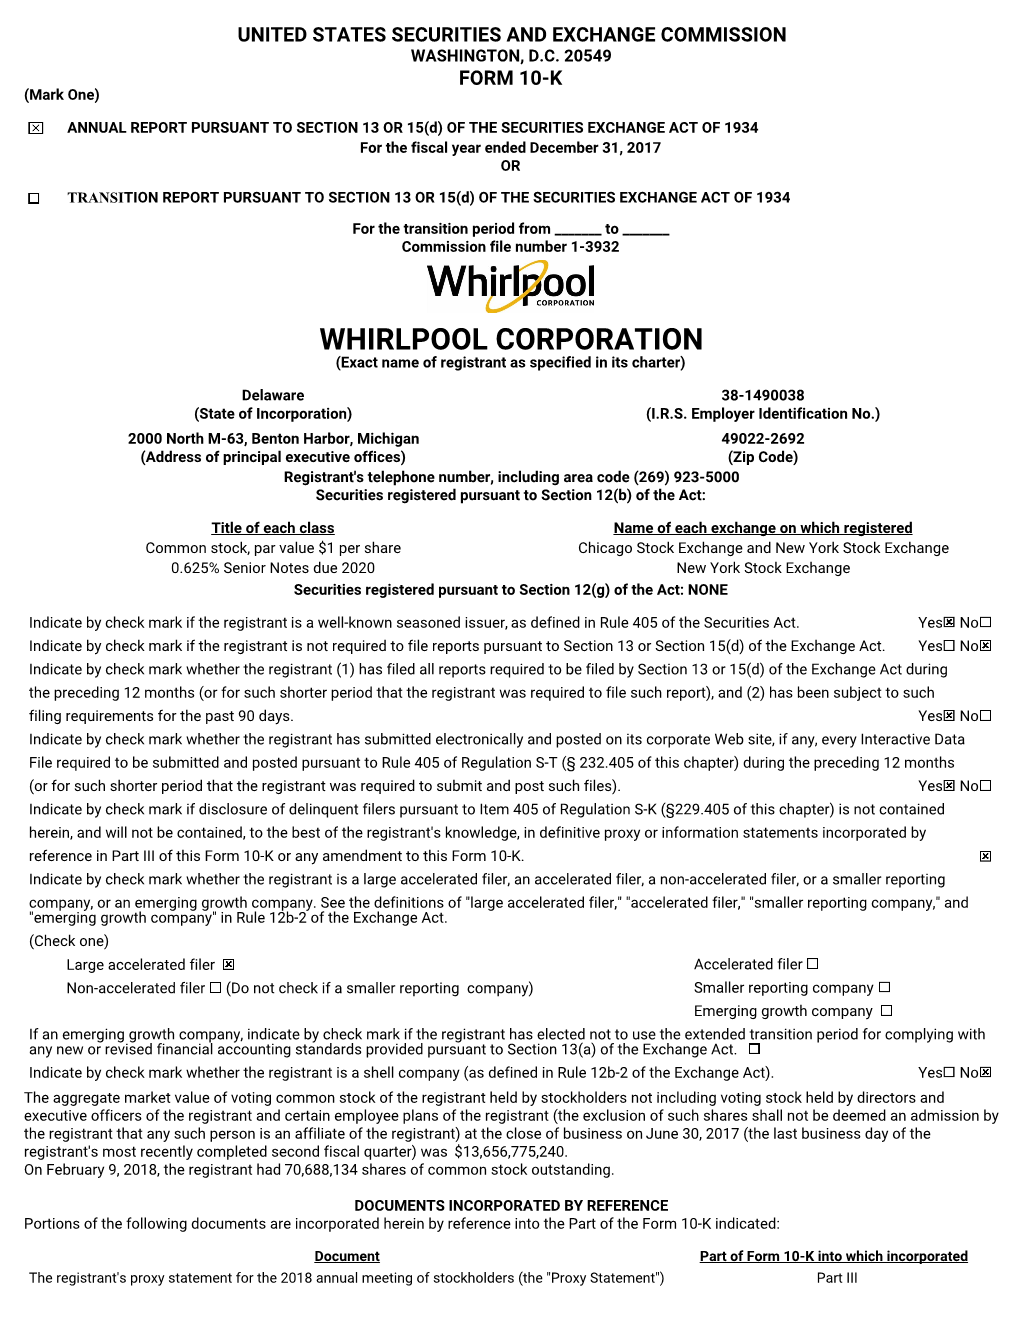 WHIRLPOOL CORPORATION (Exact Name of Registrant As Specified in Its Charter)